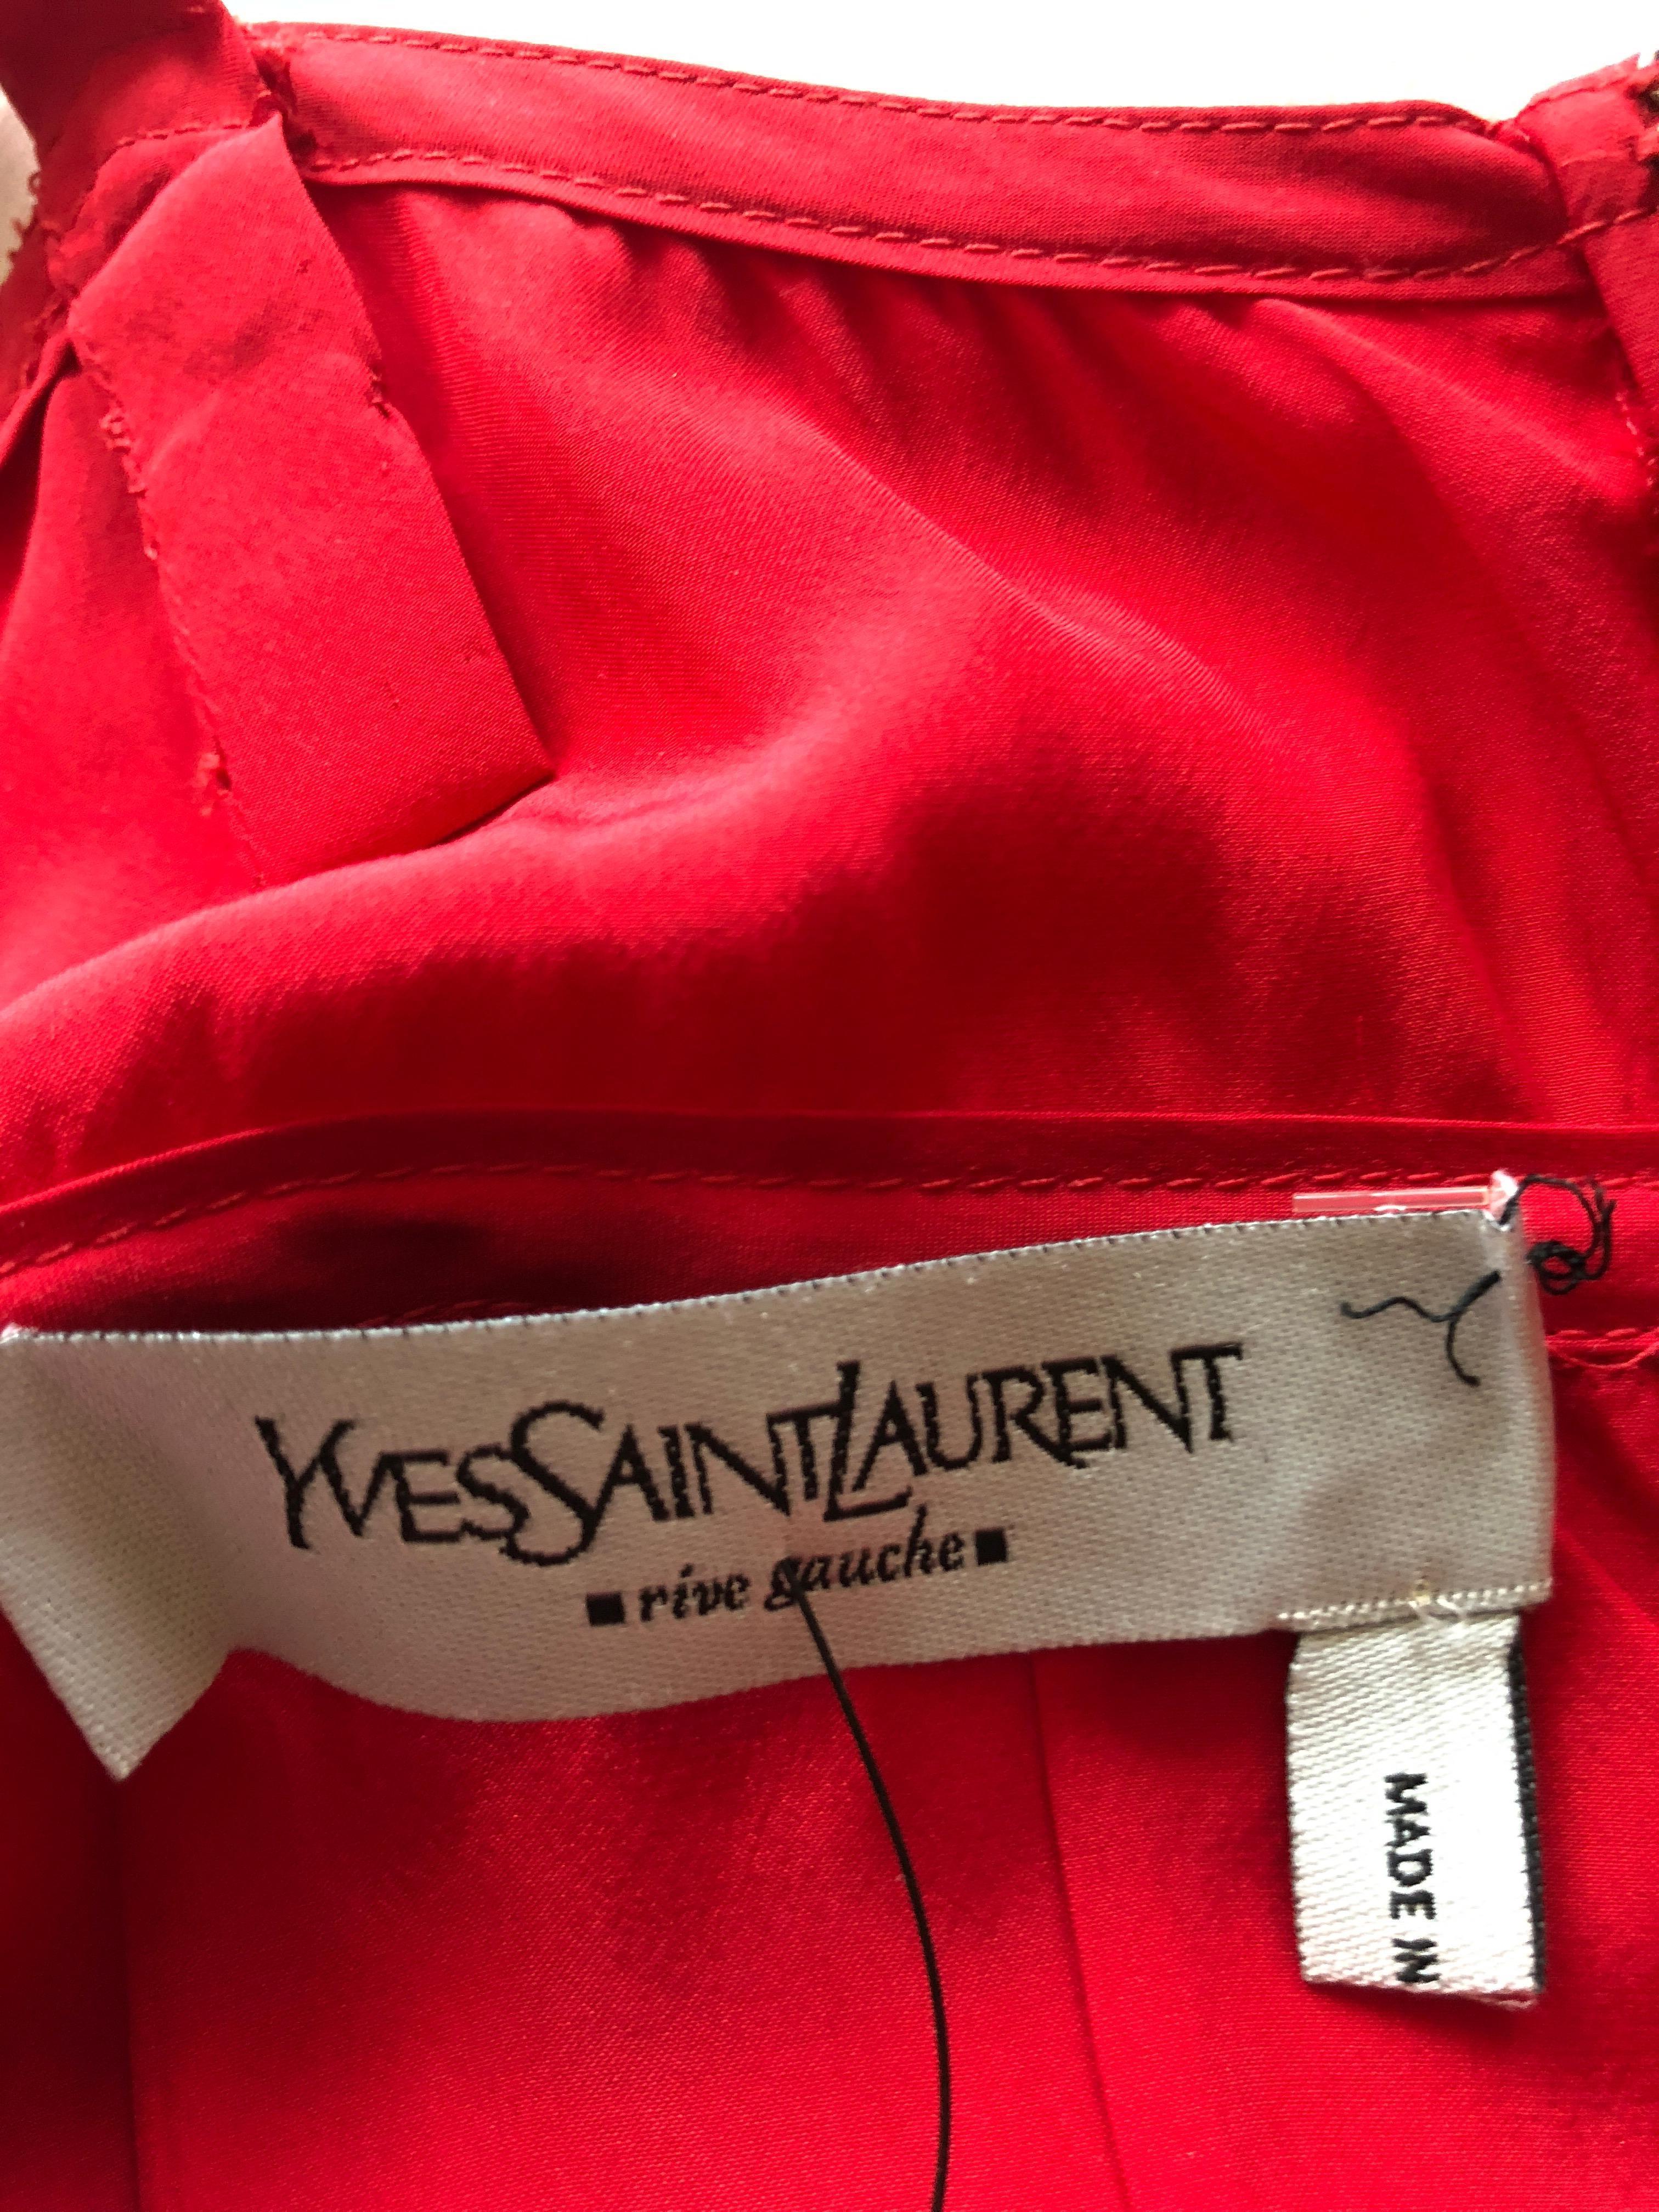 Yves Saint Laurent Tom Ford Fall 2003 Look 1 Red Ruffle Silk Dress For Sale 4